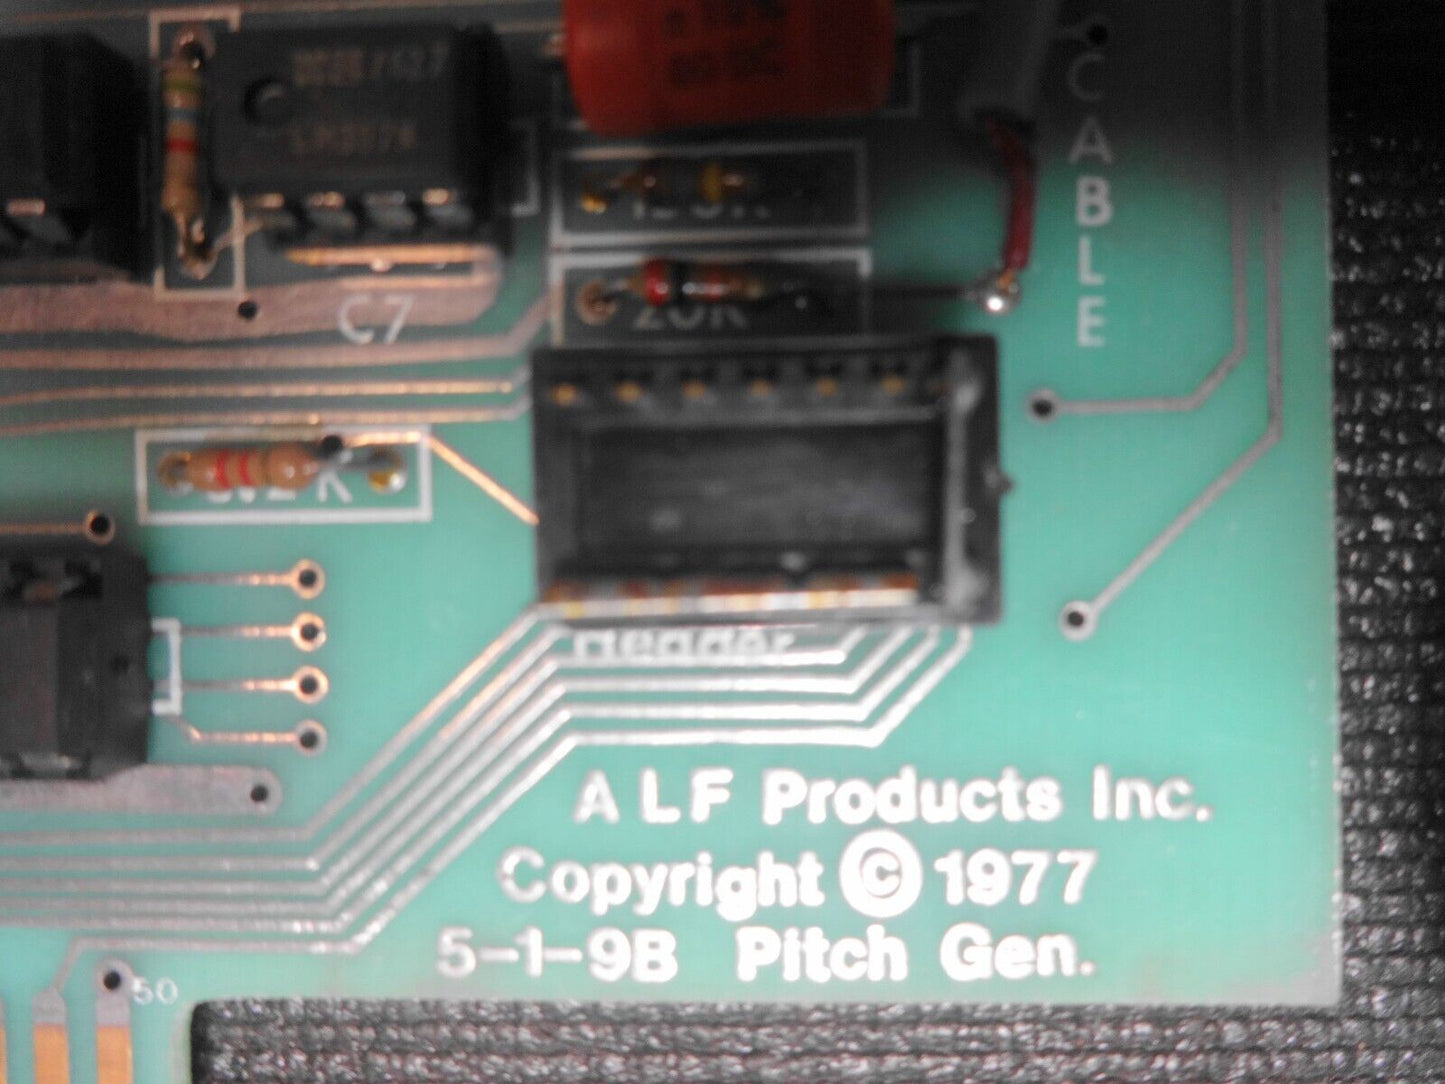 RARE ALF Products 1977 5-1-9B Pitch Gen S100 / TRS 80 / Altair - Pitch Generator